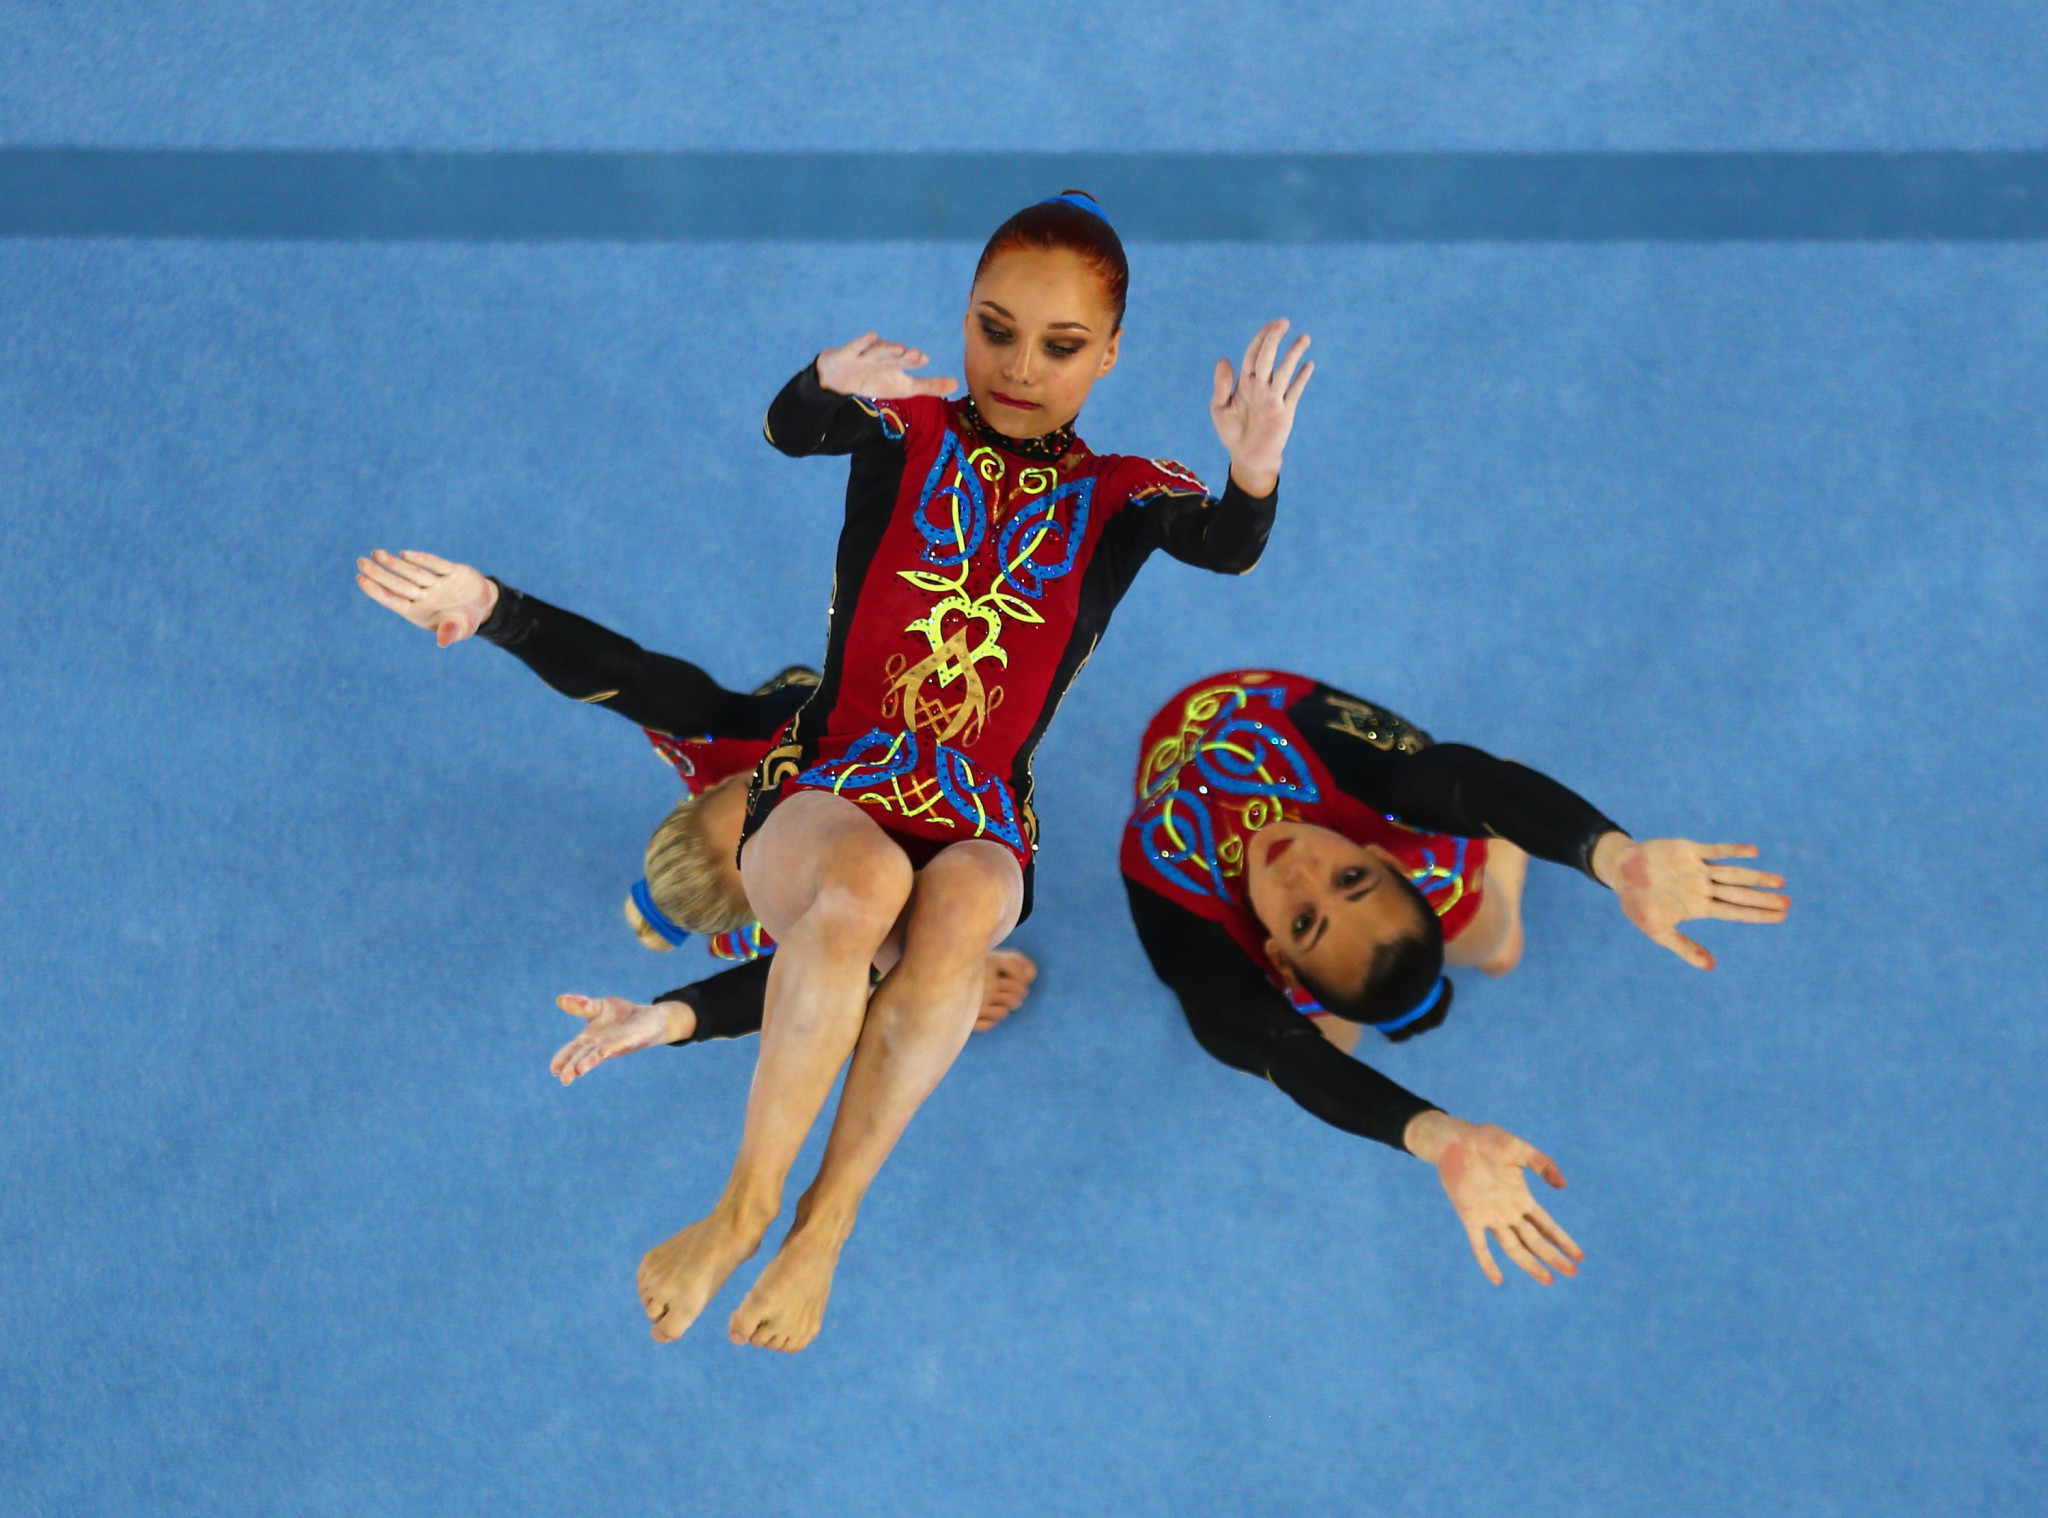 Belarus won gold and silver medals in the women's group final at the FIG  Acrobatic World Cup in Las Vegas. ©Getty Images